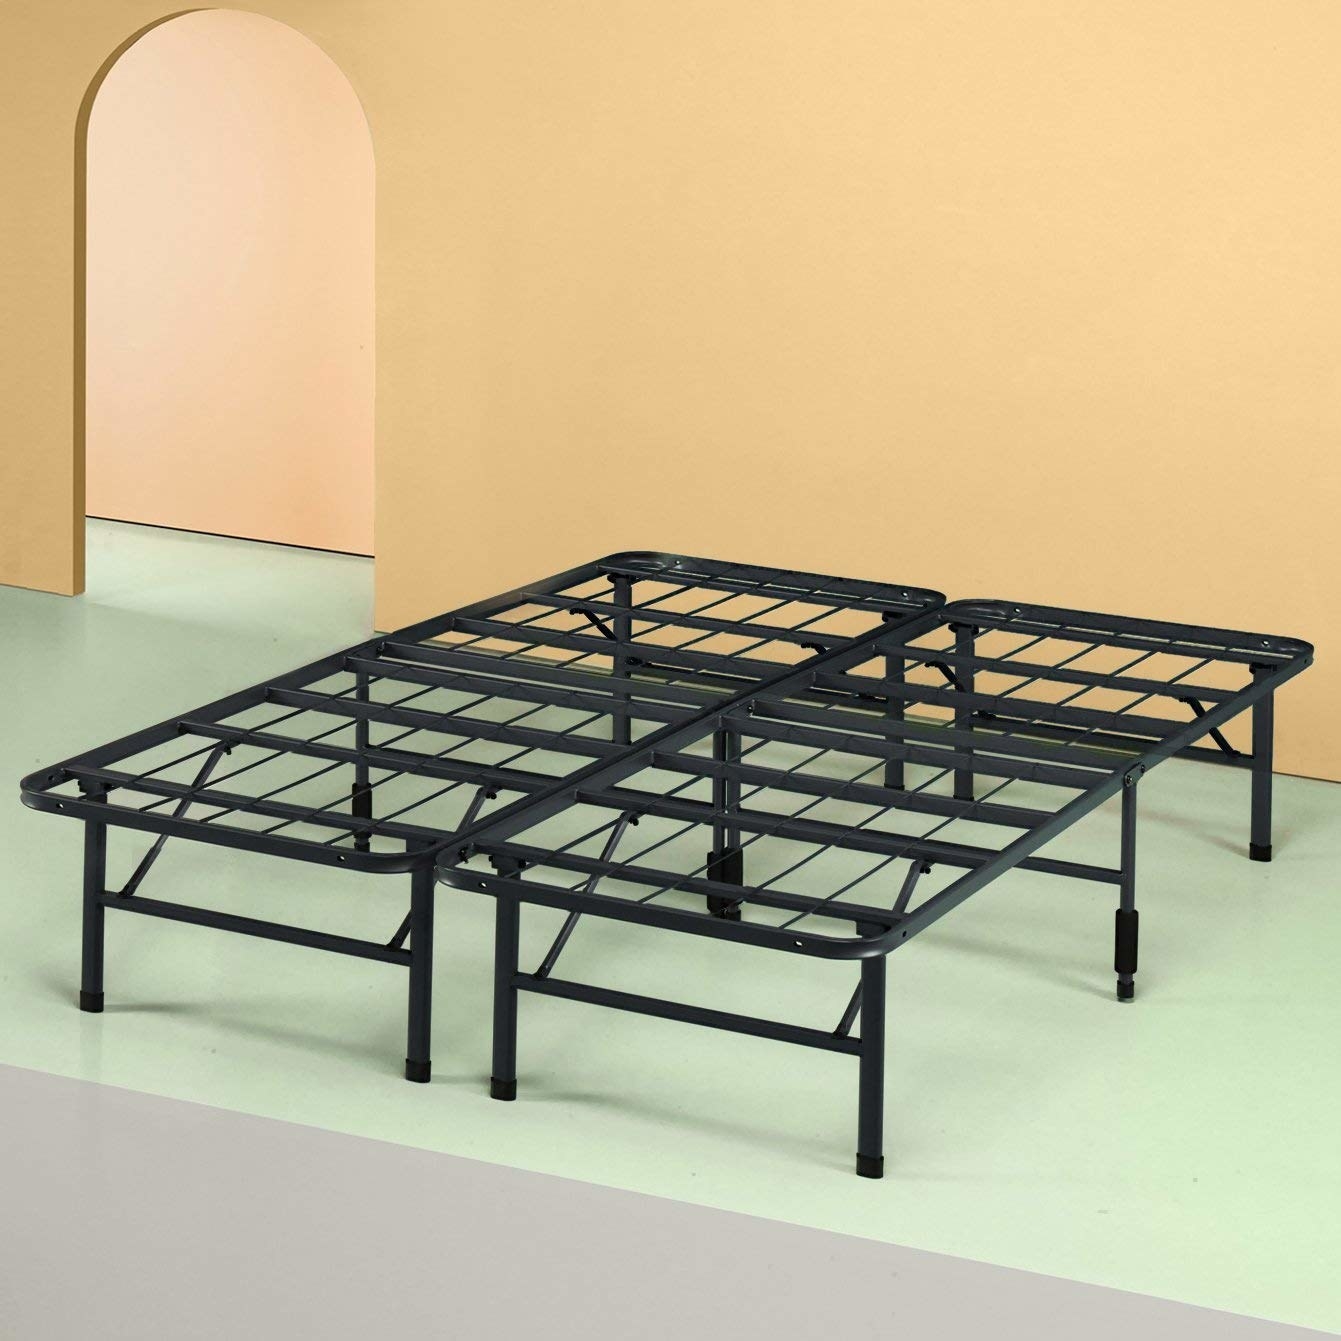 a stock image of the black bed frame